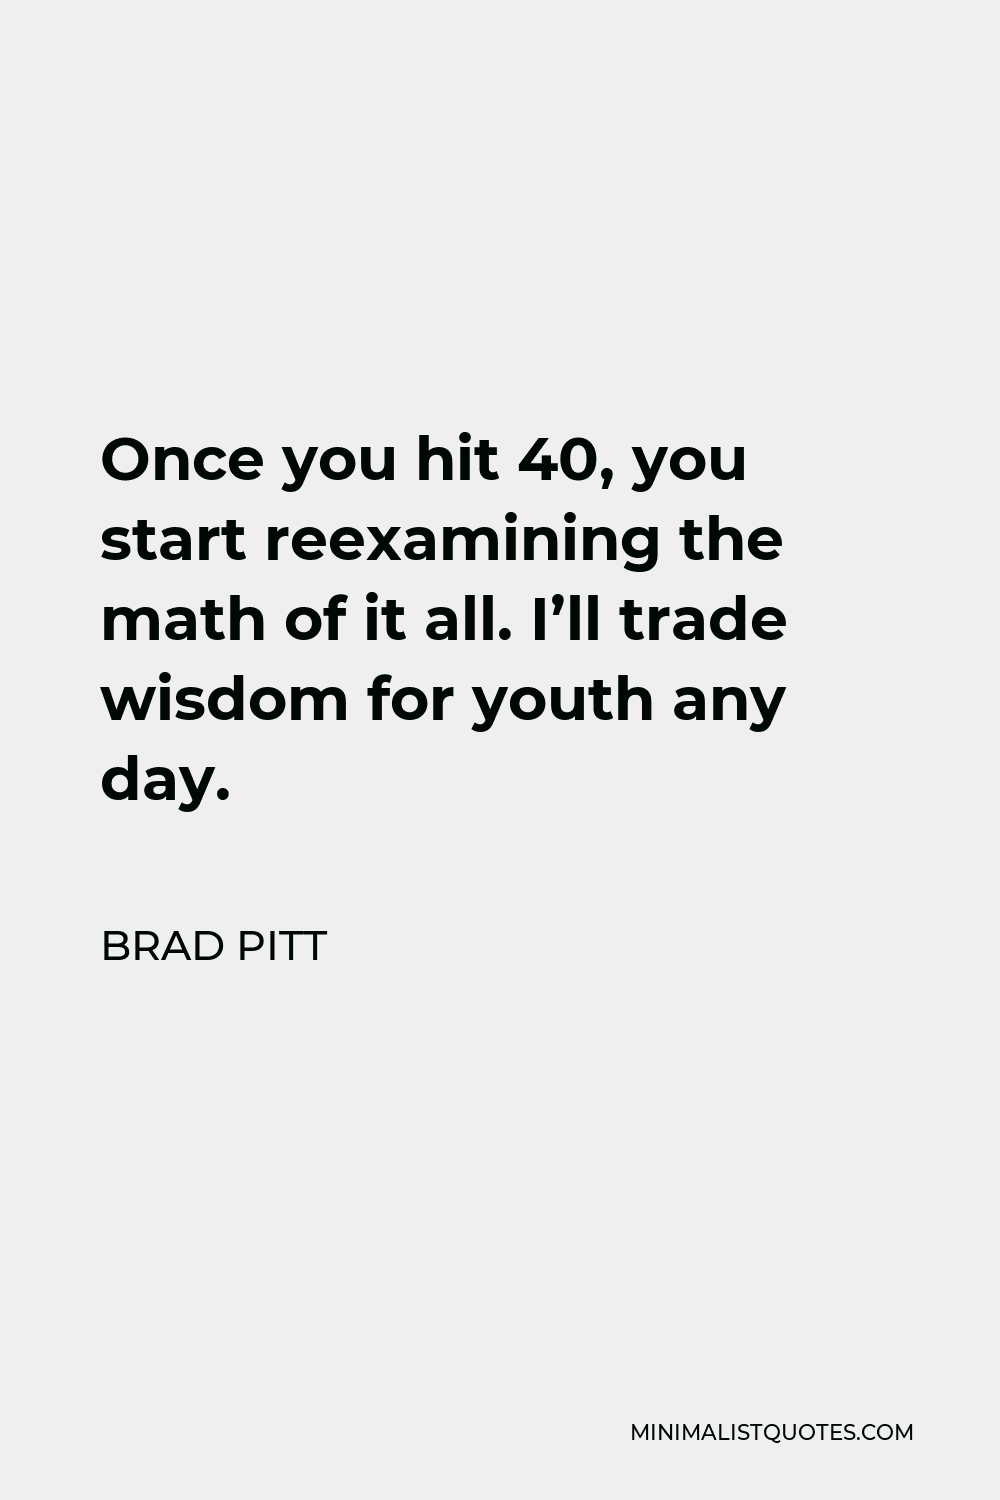 Brad Pitt Quote - Once you hit 40, you start reexamining the math of it all. I’ll trade wisdom for youth any day.